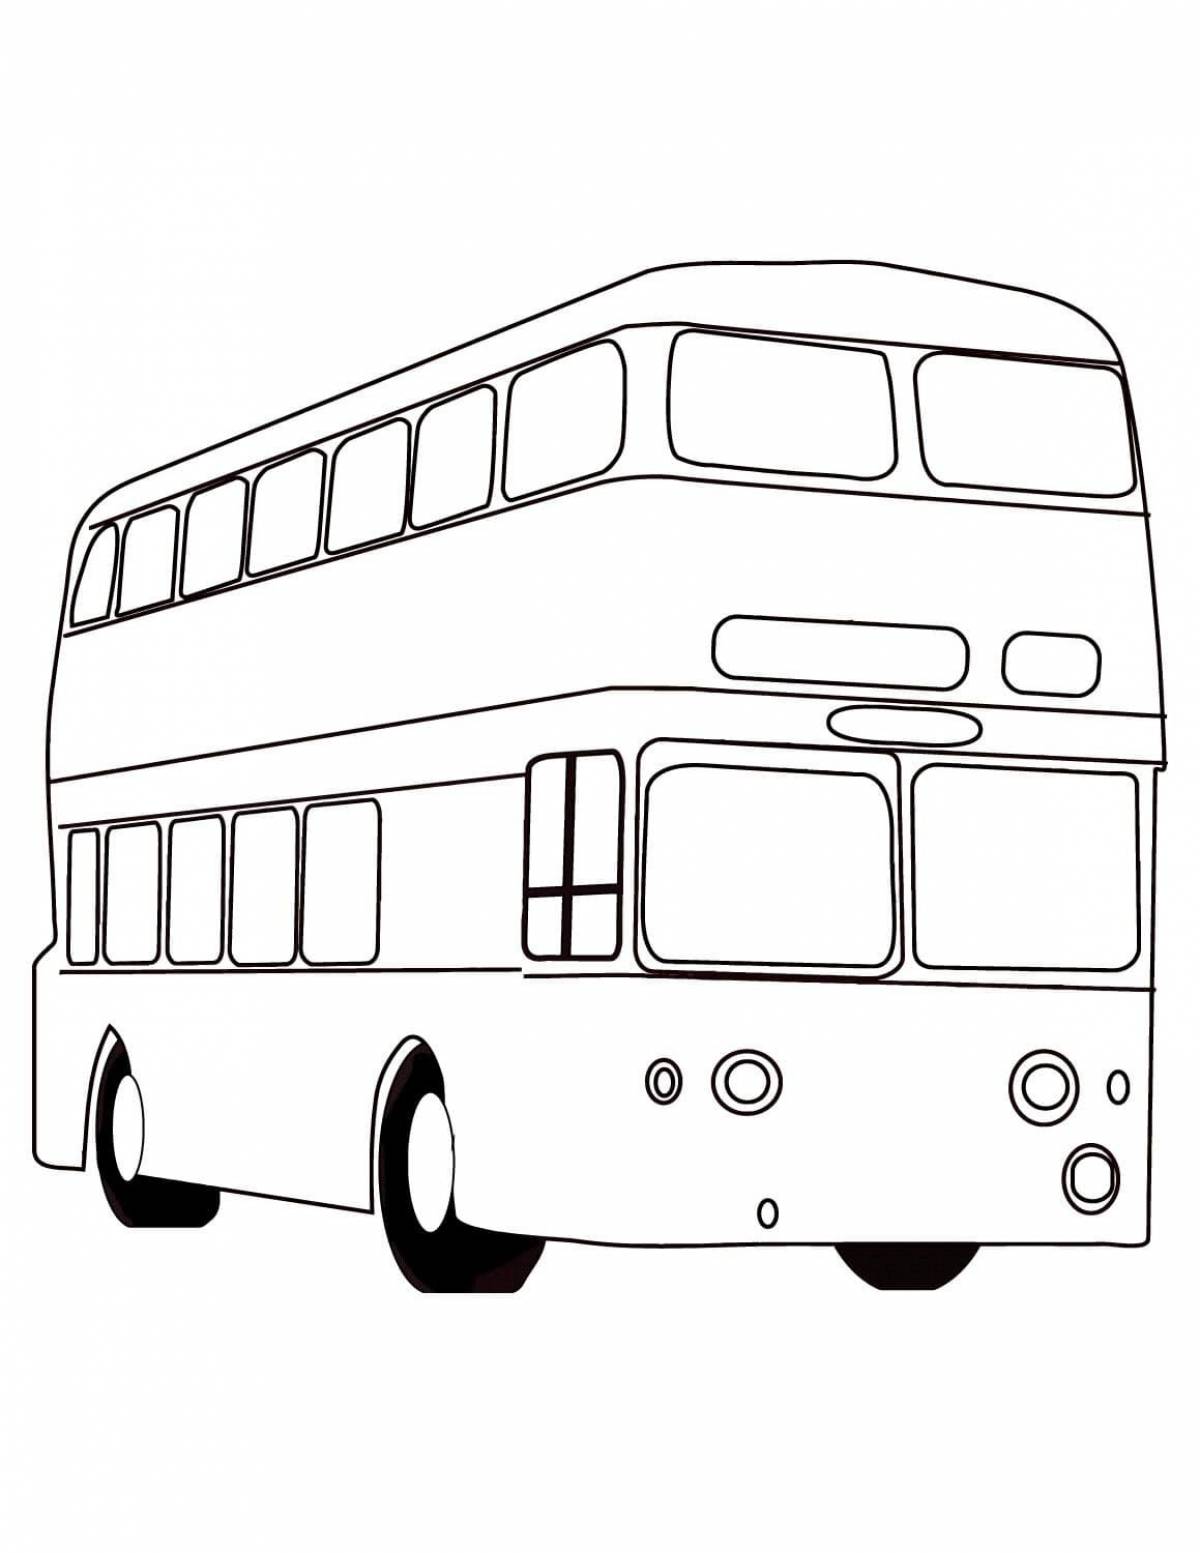 Fantastic bus coloring book for 2-3 year olds